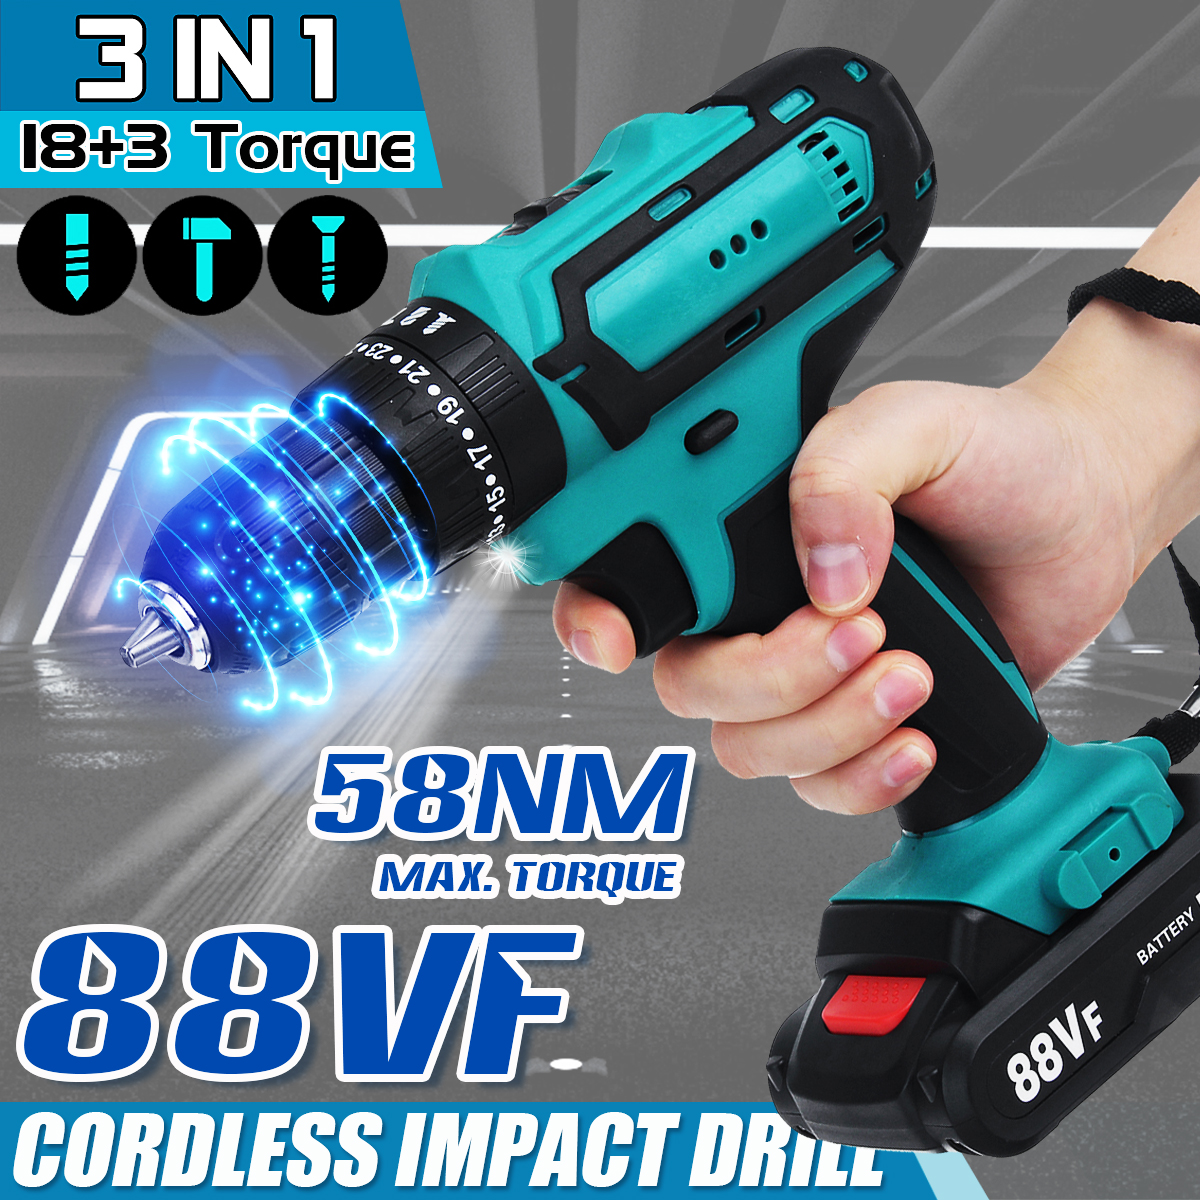 88VF-Cordless-Drill-3-IN-1-Electric-Screwdriver-Hammer-Impact-Drill-7500mAh-2-Speed-1787578-1